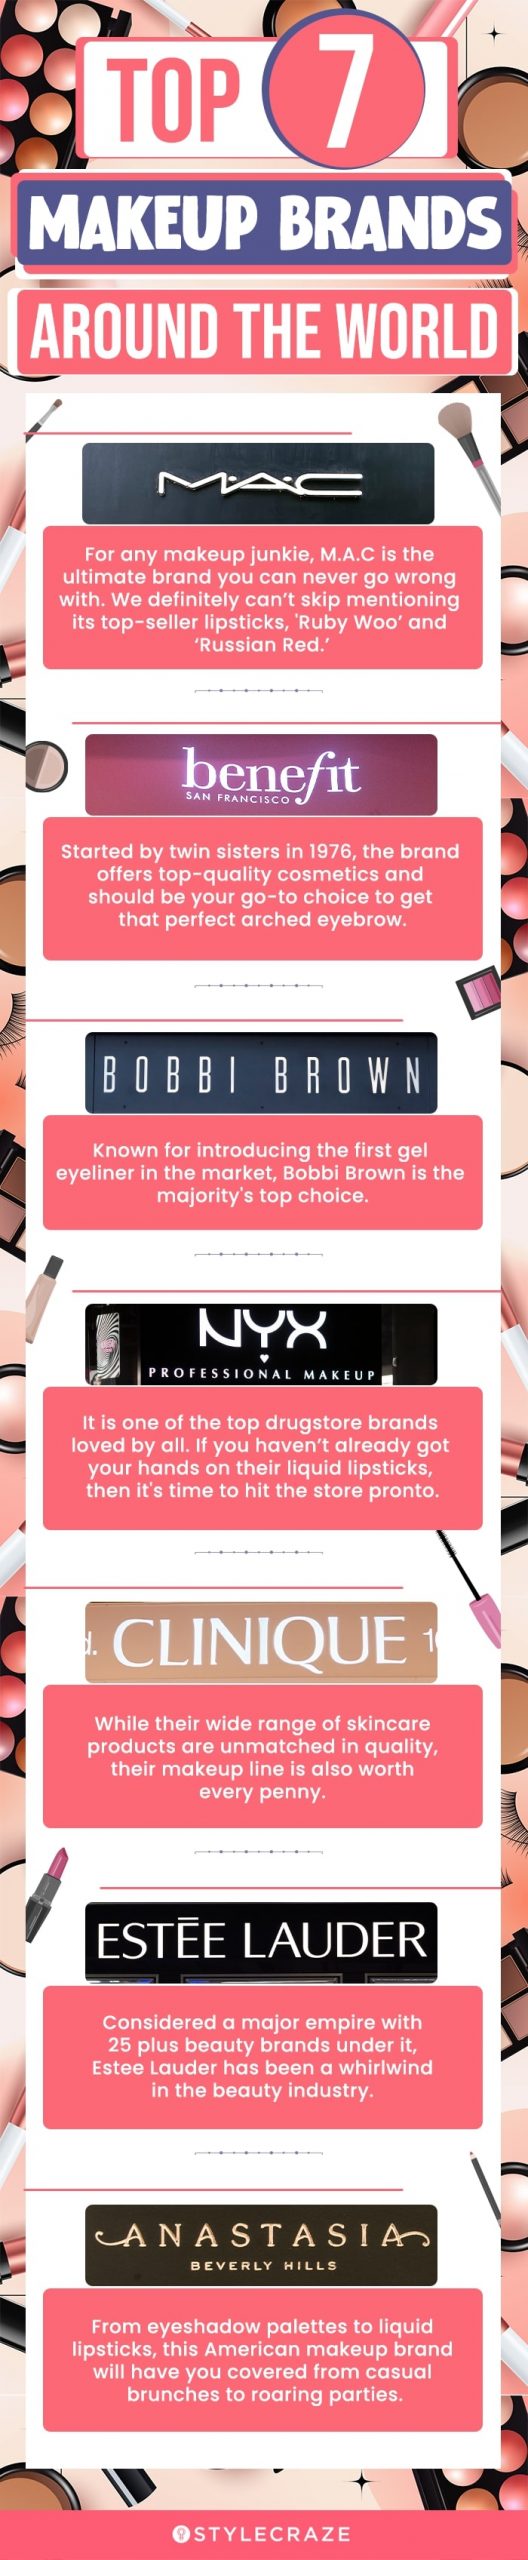 top 7 makeup brands around the world (infographic)